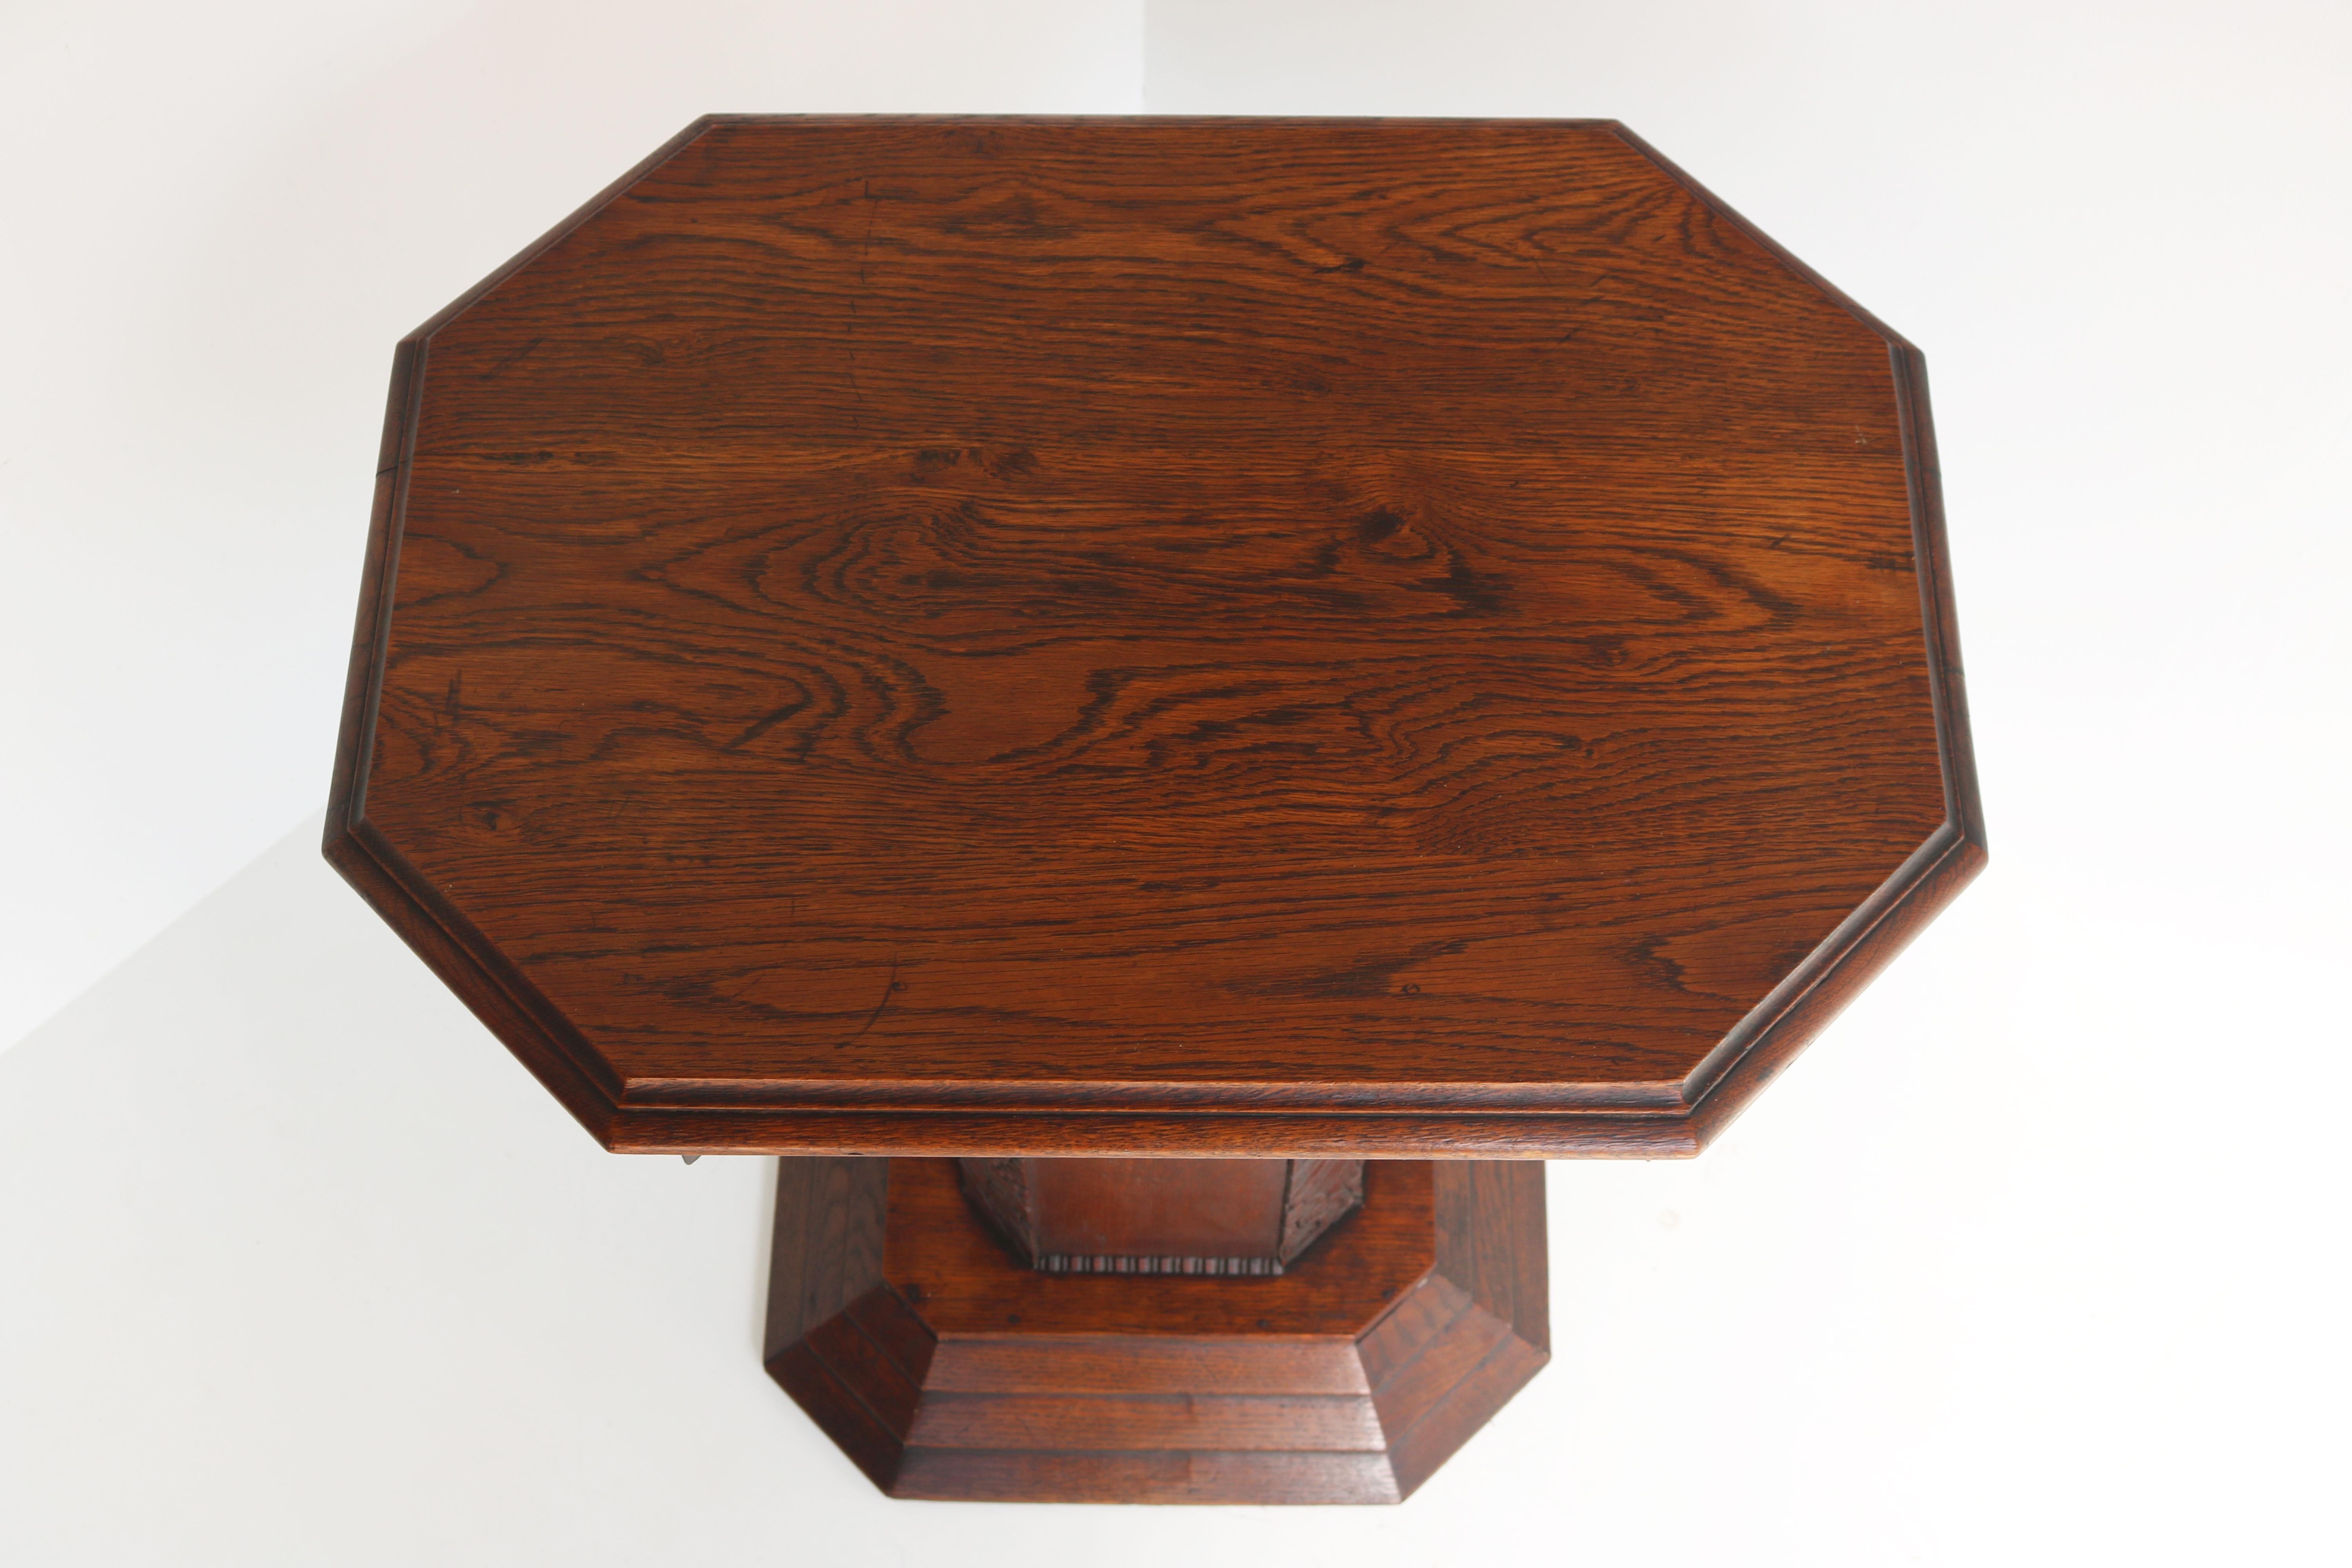 Early 20th Century Antique French Art Deco Side Table 1920 Coffee Table Solid Oak Carved Geometric